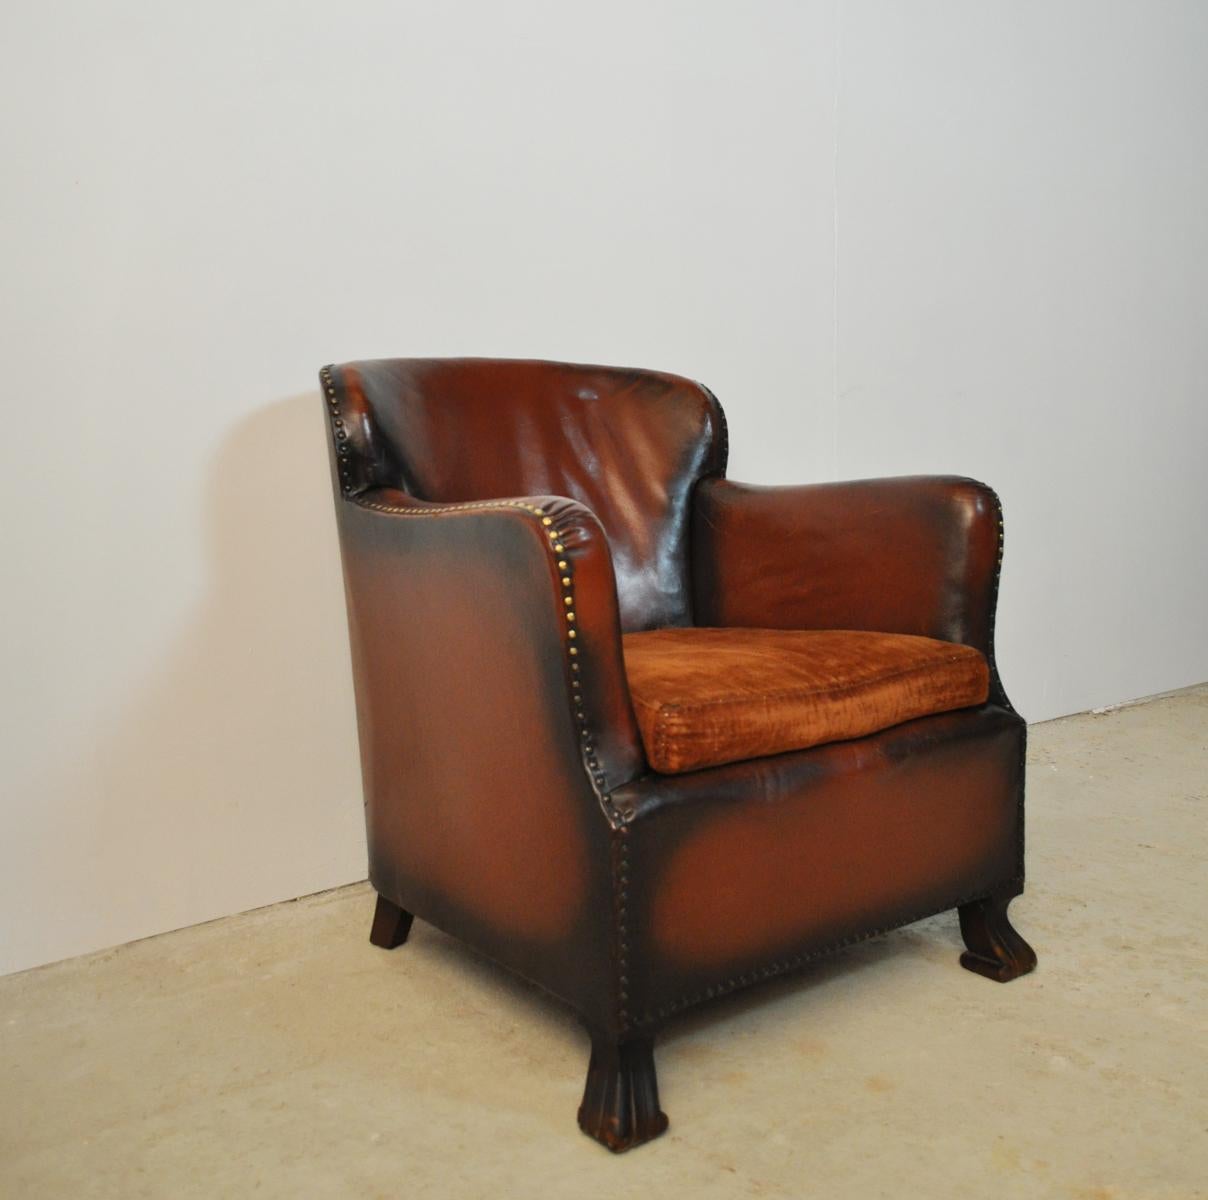 Club armchair with original leather in an amazing whiskey brown color, with the original vintage patina and brass nailhead. Designed in the 1920s.

Patinated with signs of wear consistent with age and use.